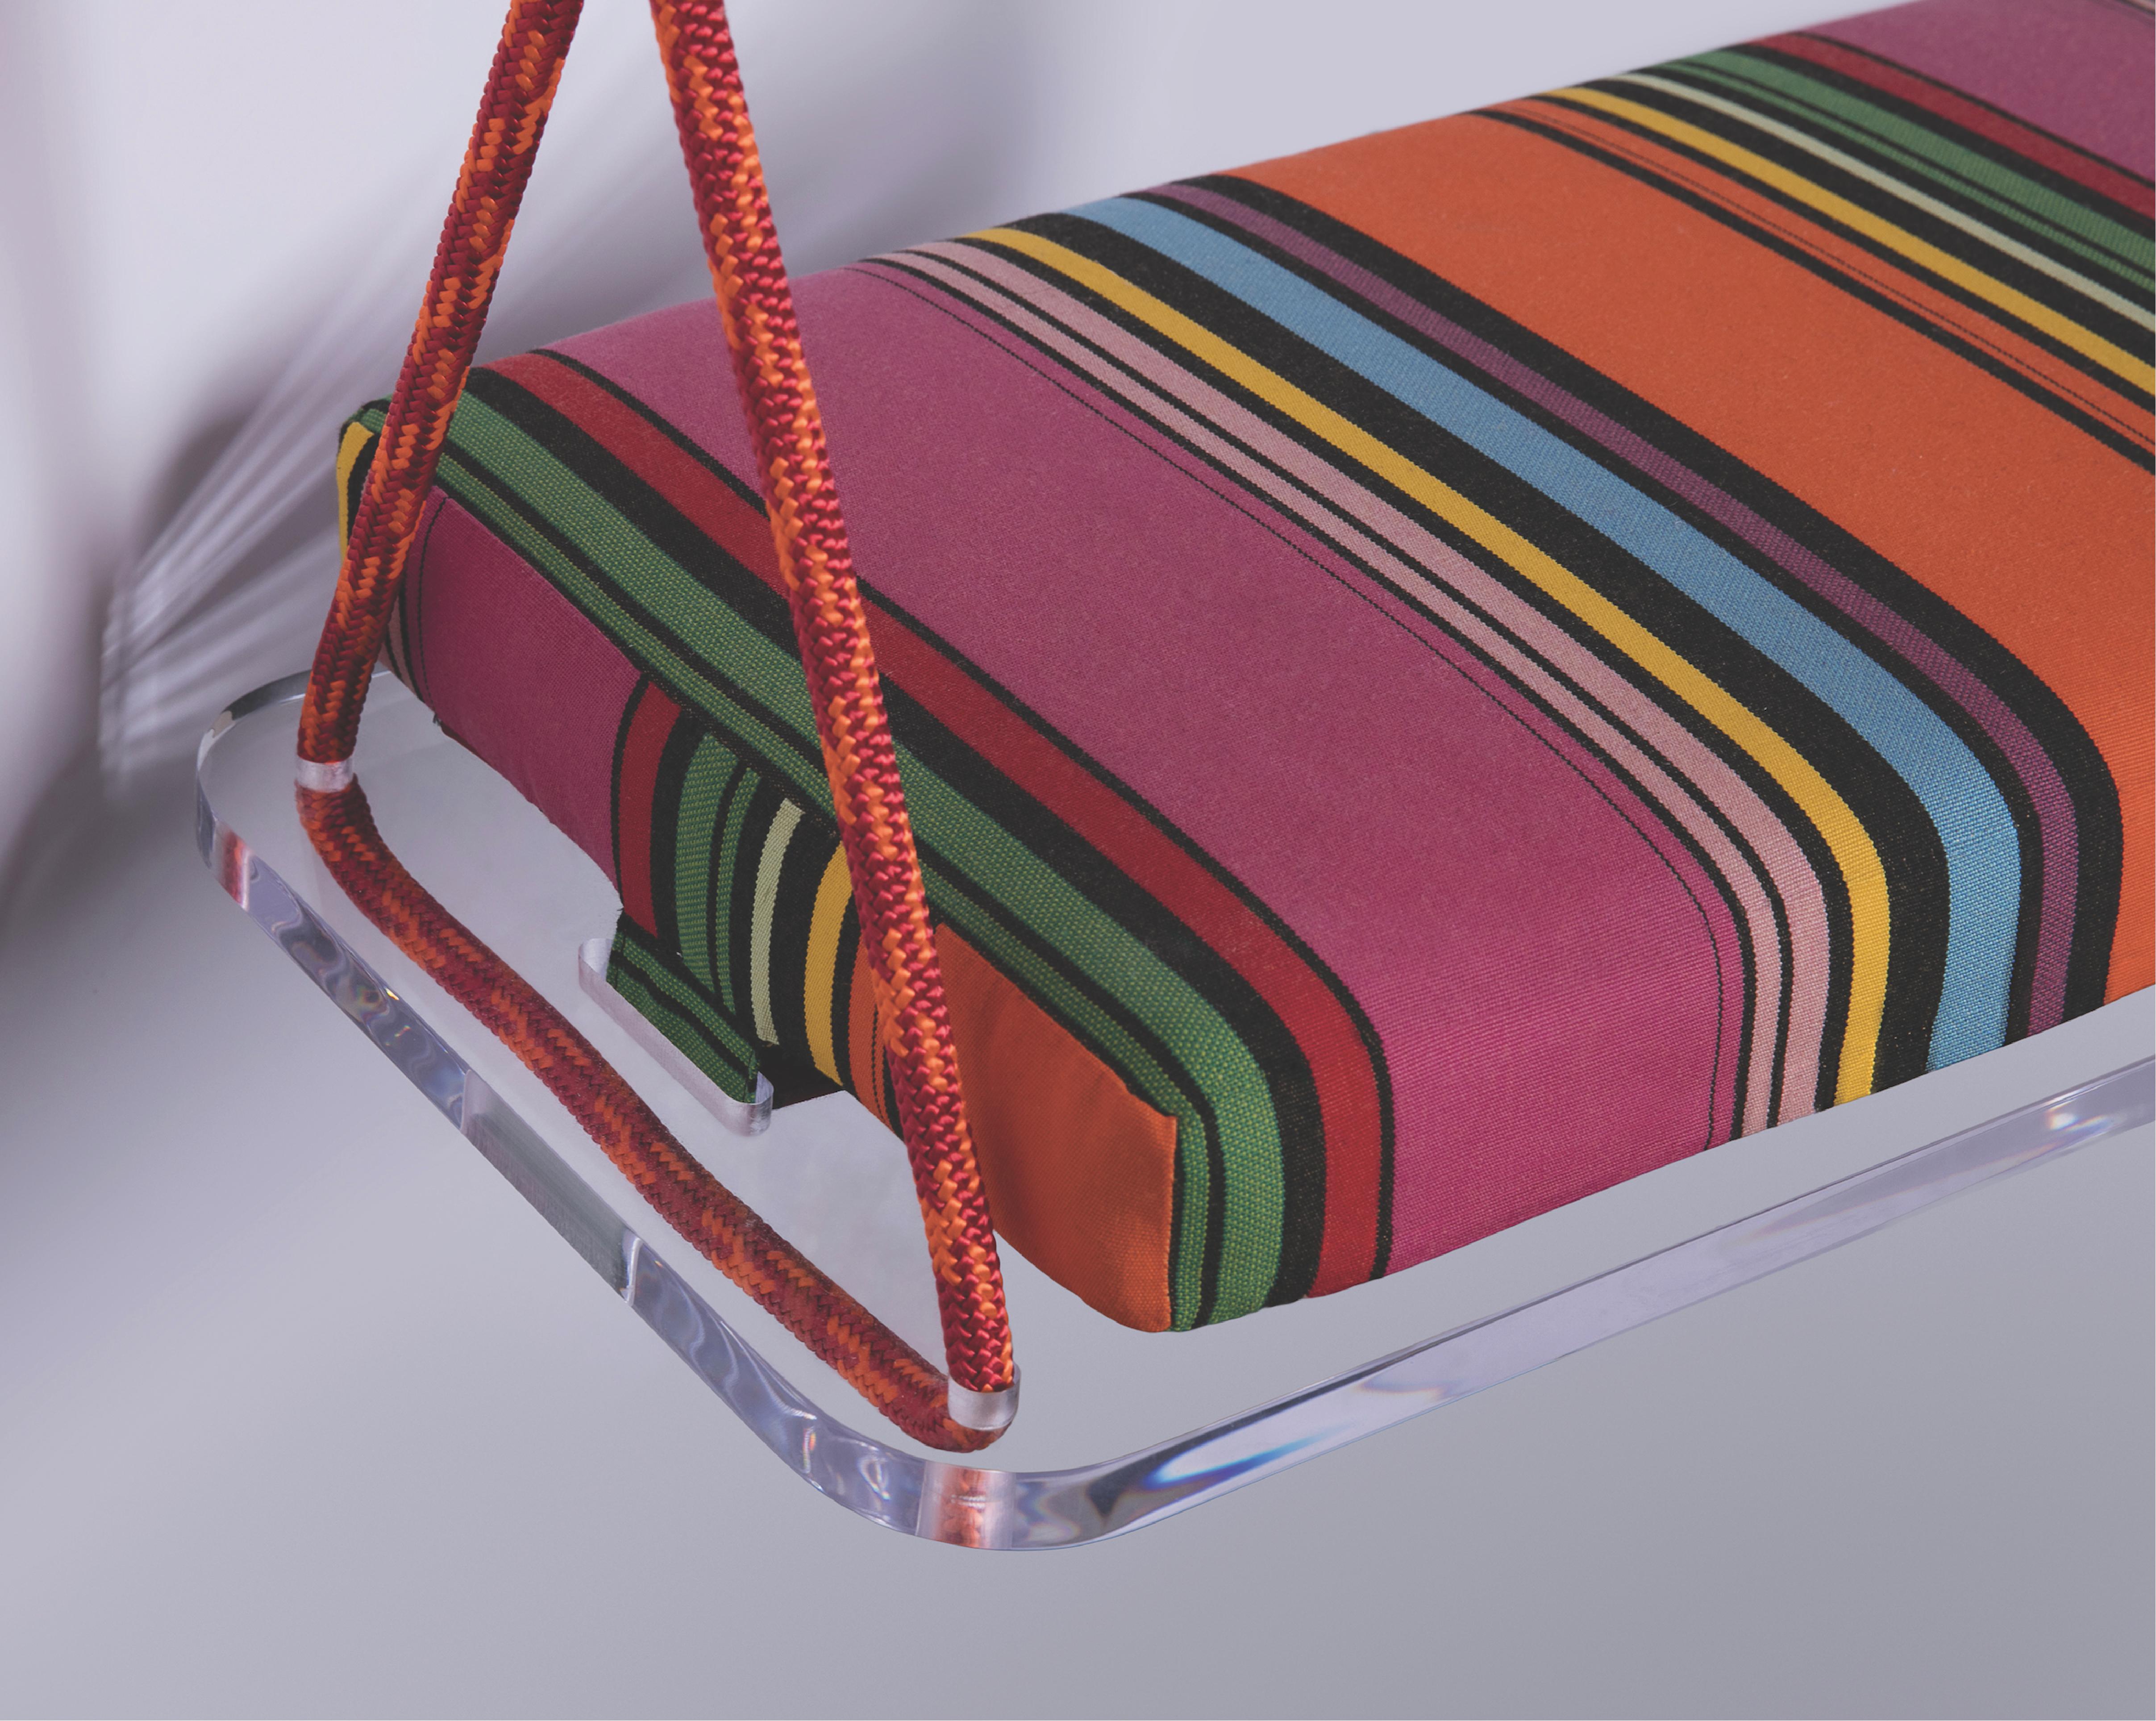 The Pick-Me-Up Single seat swing is a playful indoor and outdoor swing featuring a striped Sunbrella cushion, colorful accessory cord, a Lucite base and Lucite accessories. Featured here is a vintage inspired striped Sunbrella, however, there are a